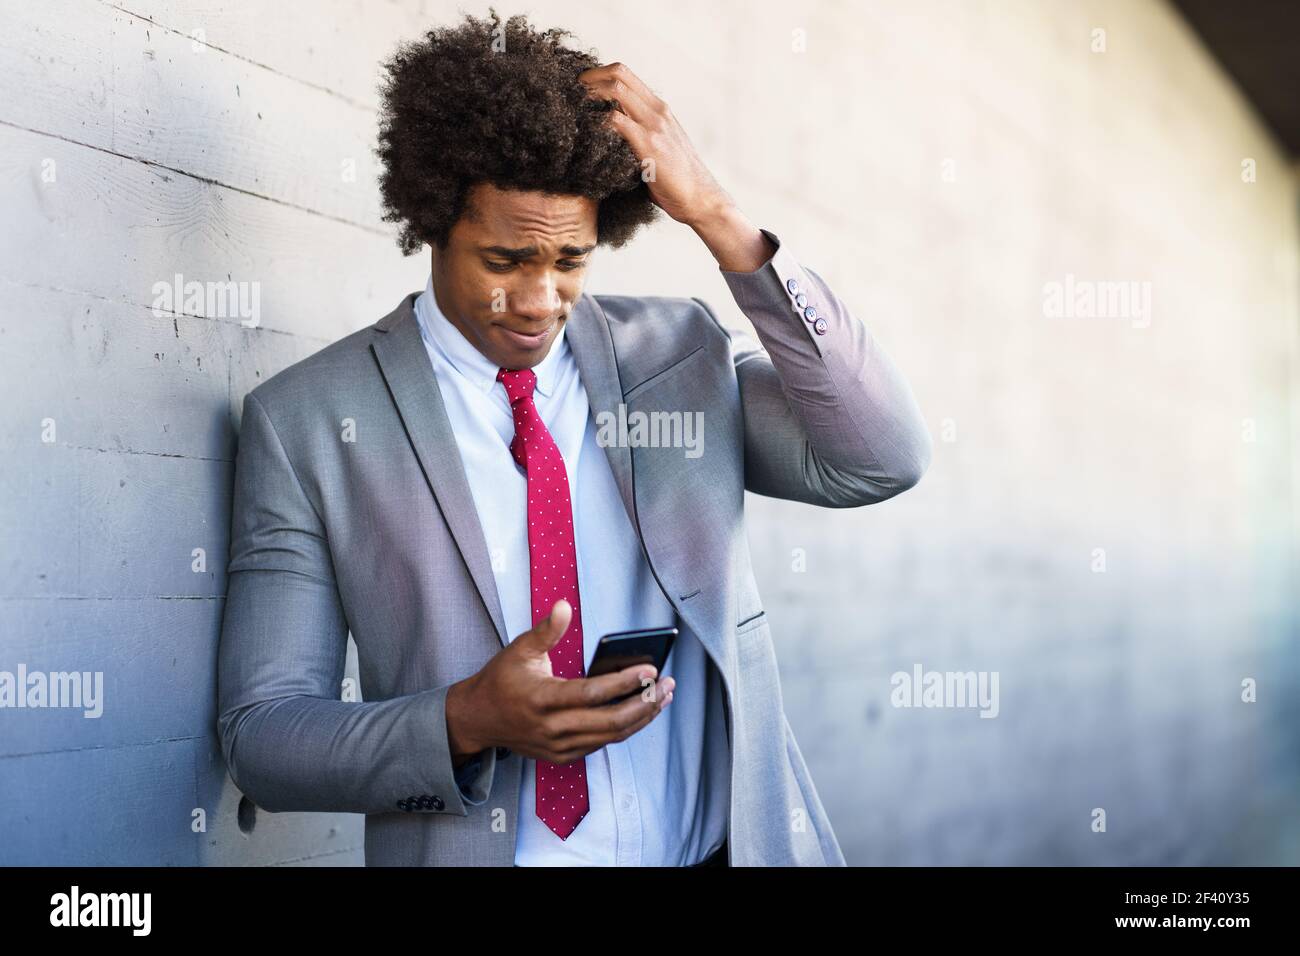 Worried Black Businessman using his smartphone near an office building. Man with afro hair.. Worried Black Businessman using his smartphone outdoors. Stock Photo